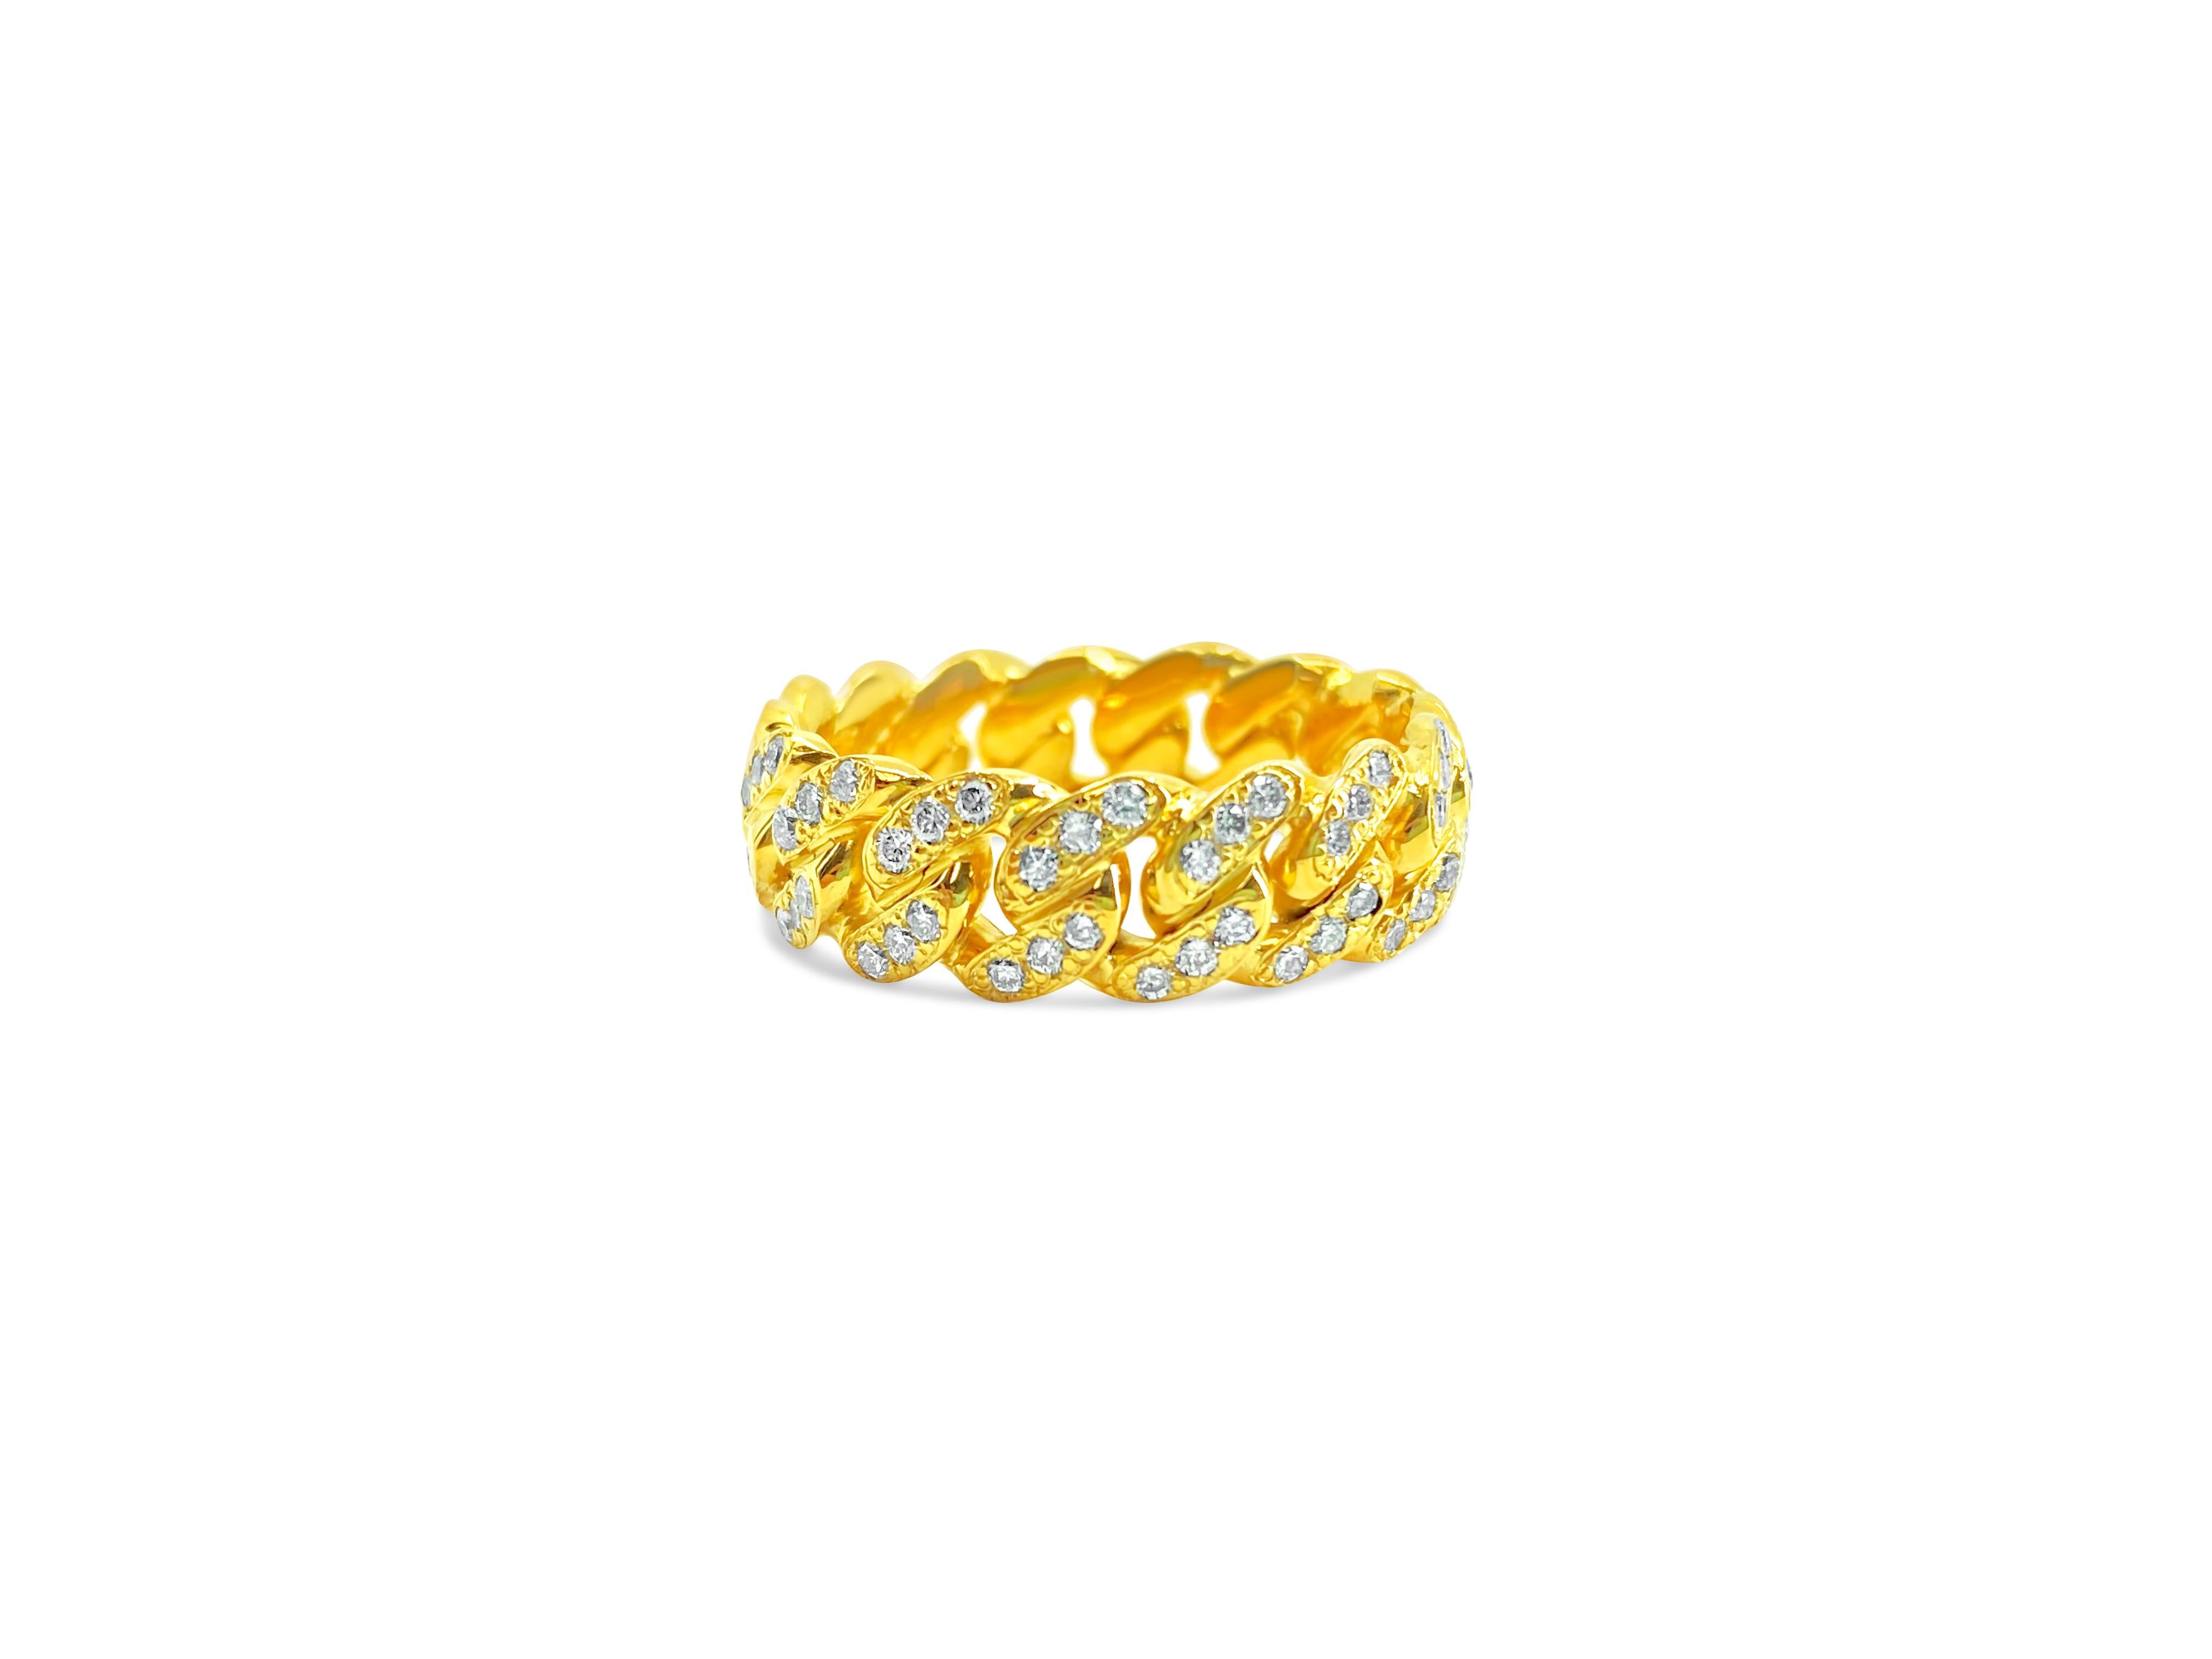 Crafted from 10k yellow gold, this striking men's Miami Cuban ring features a total diamond weight of 1.50 carats, boasting VS clarity and G color. With a total weight of 7.56 grams and a ring size of US 9.50, it's a bold and elegant choice for the